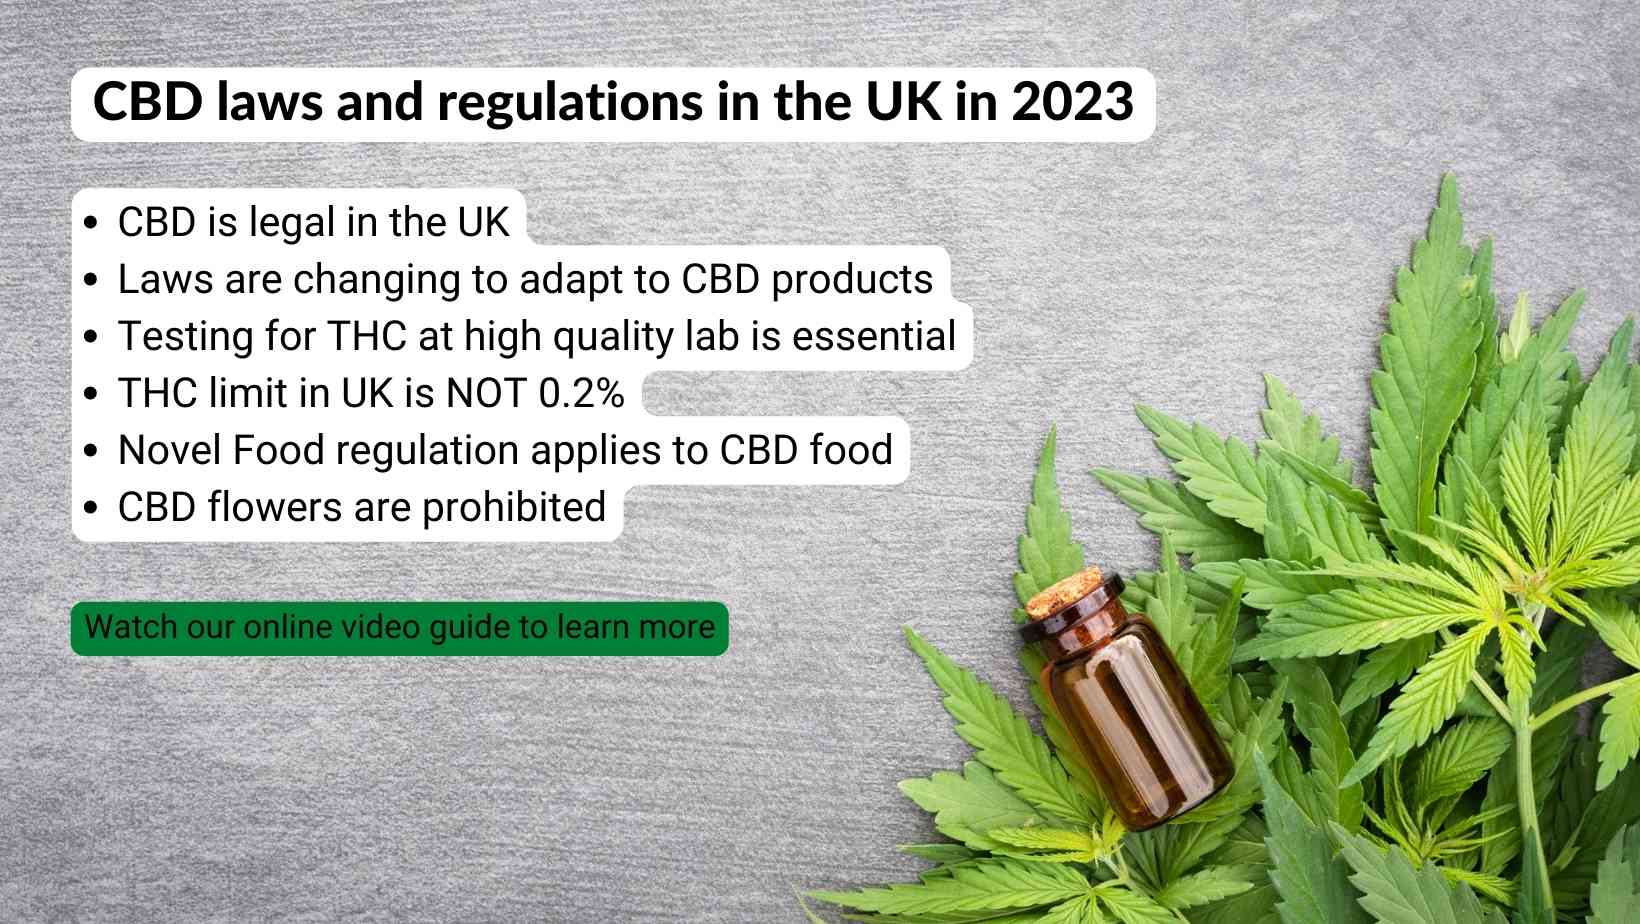 Read about the CBD laws and regulations in the UK